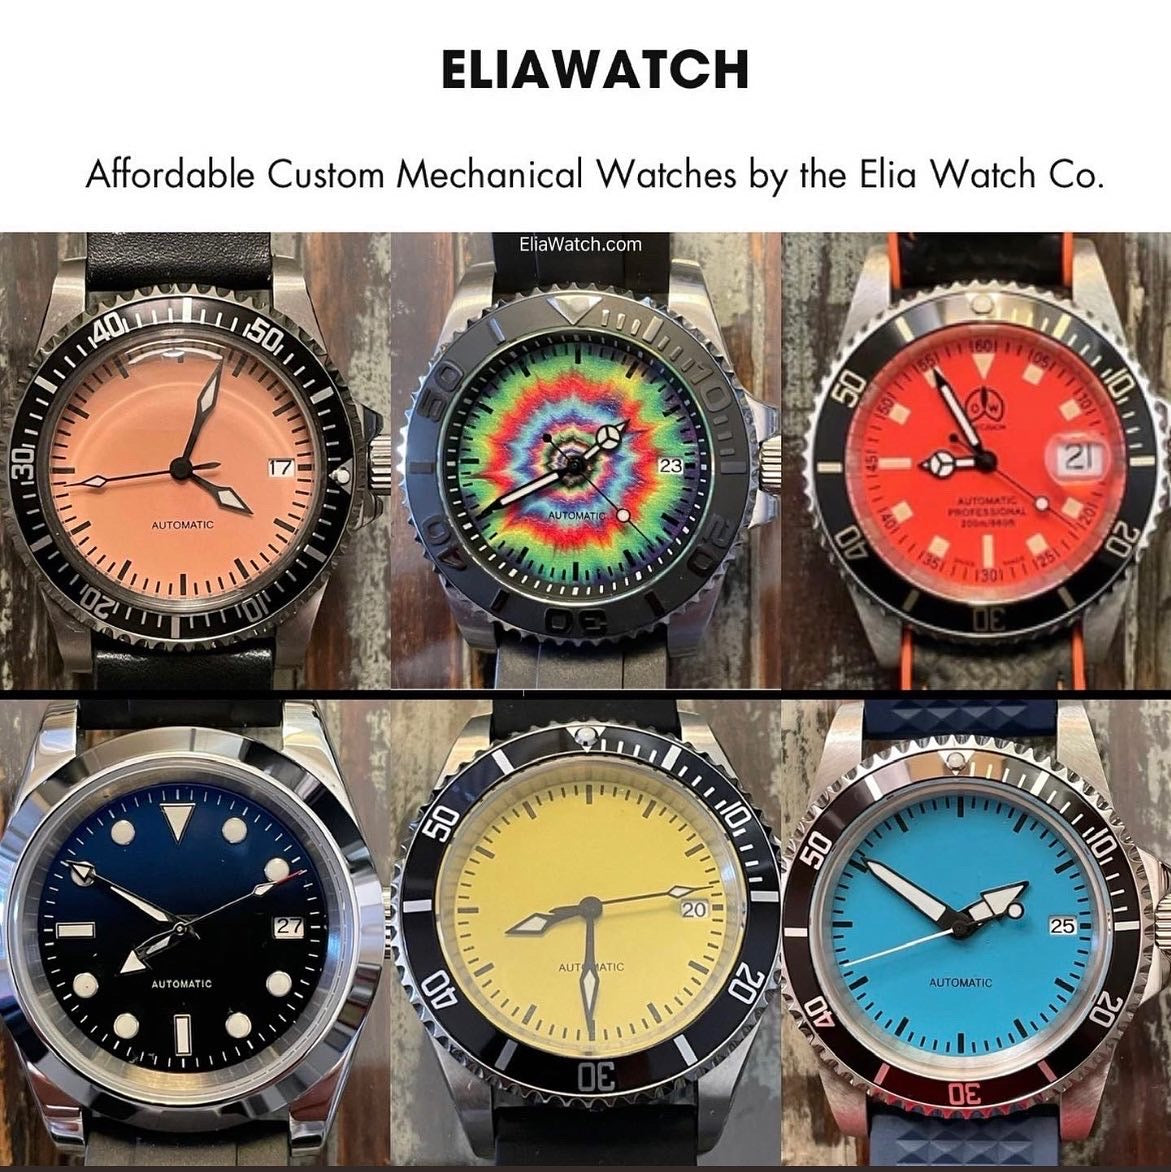 Elia Watch is creating some beautiful pieces.